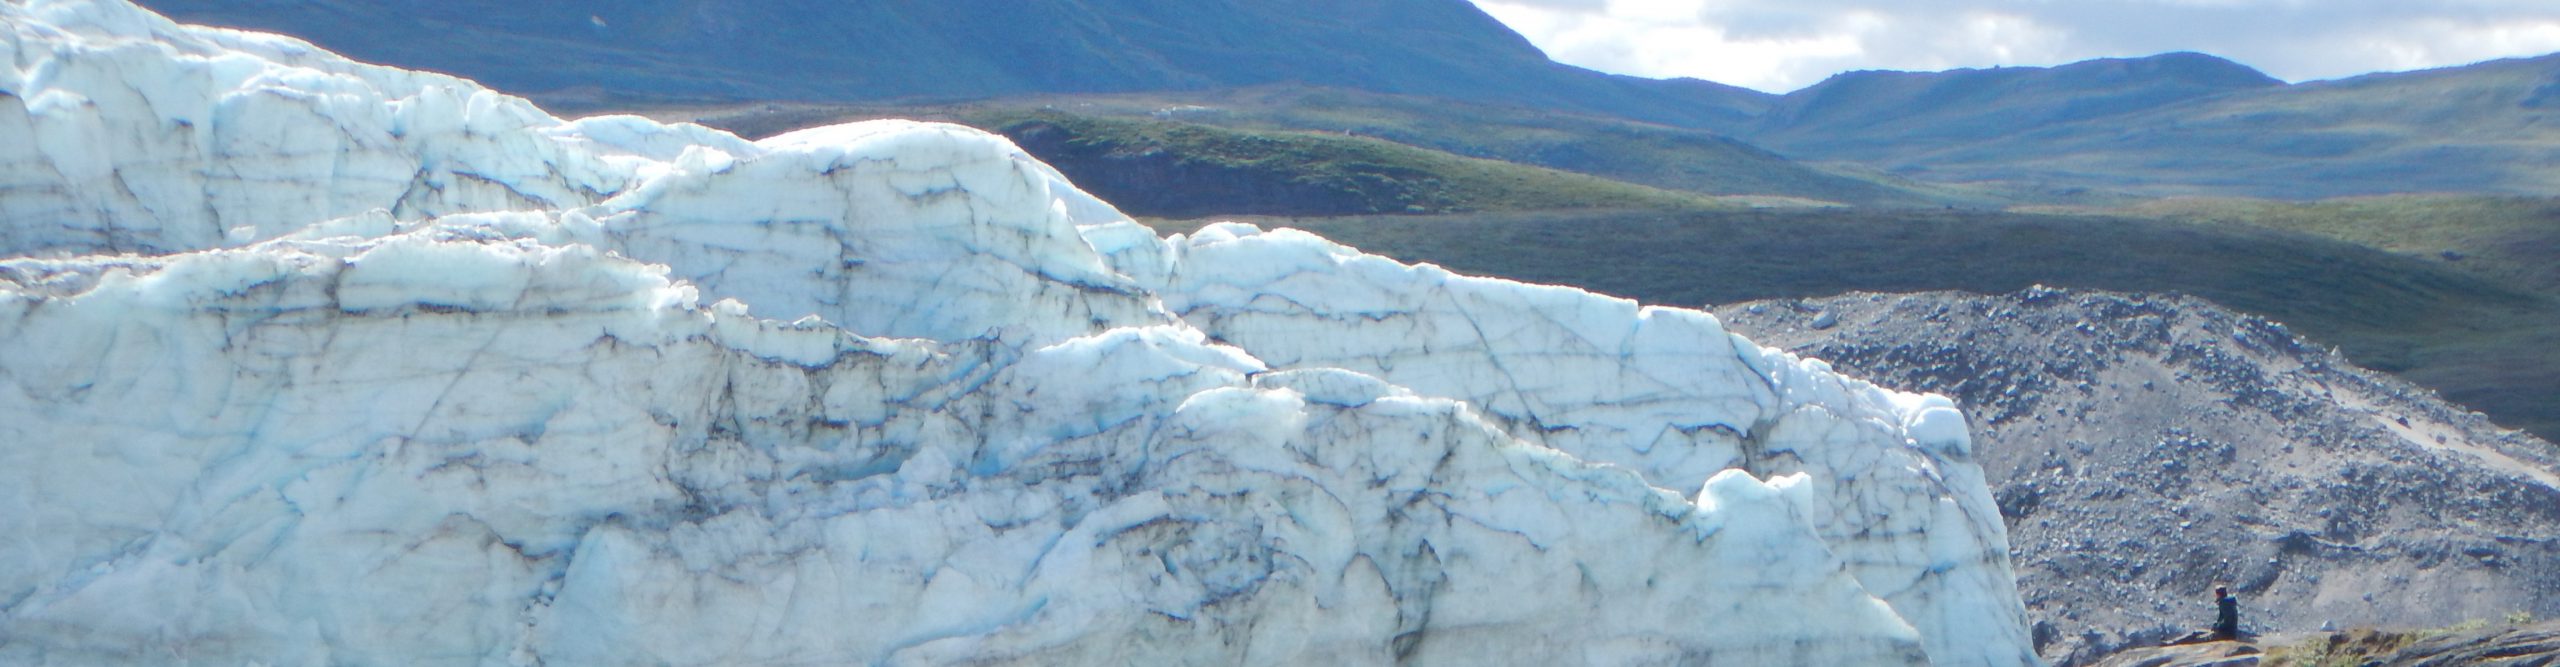 Significance of Ice-Loss to Landscapes in the Arctic